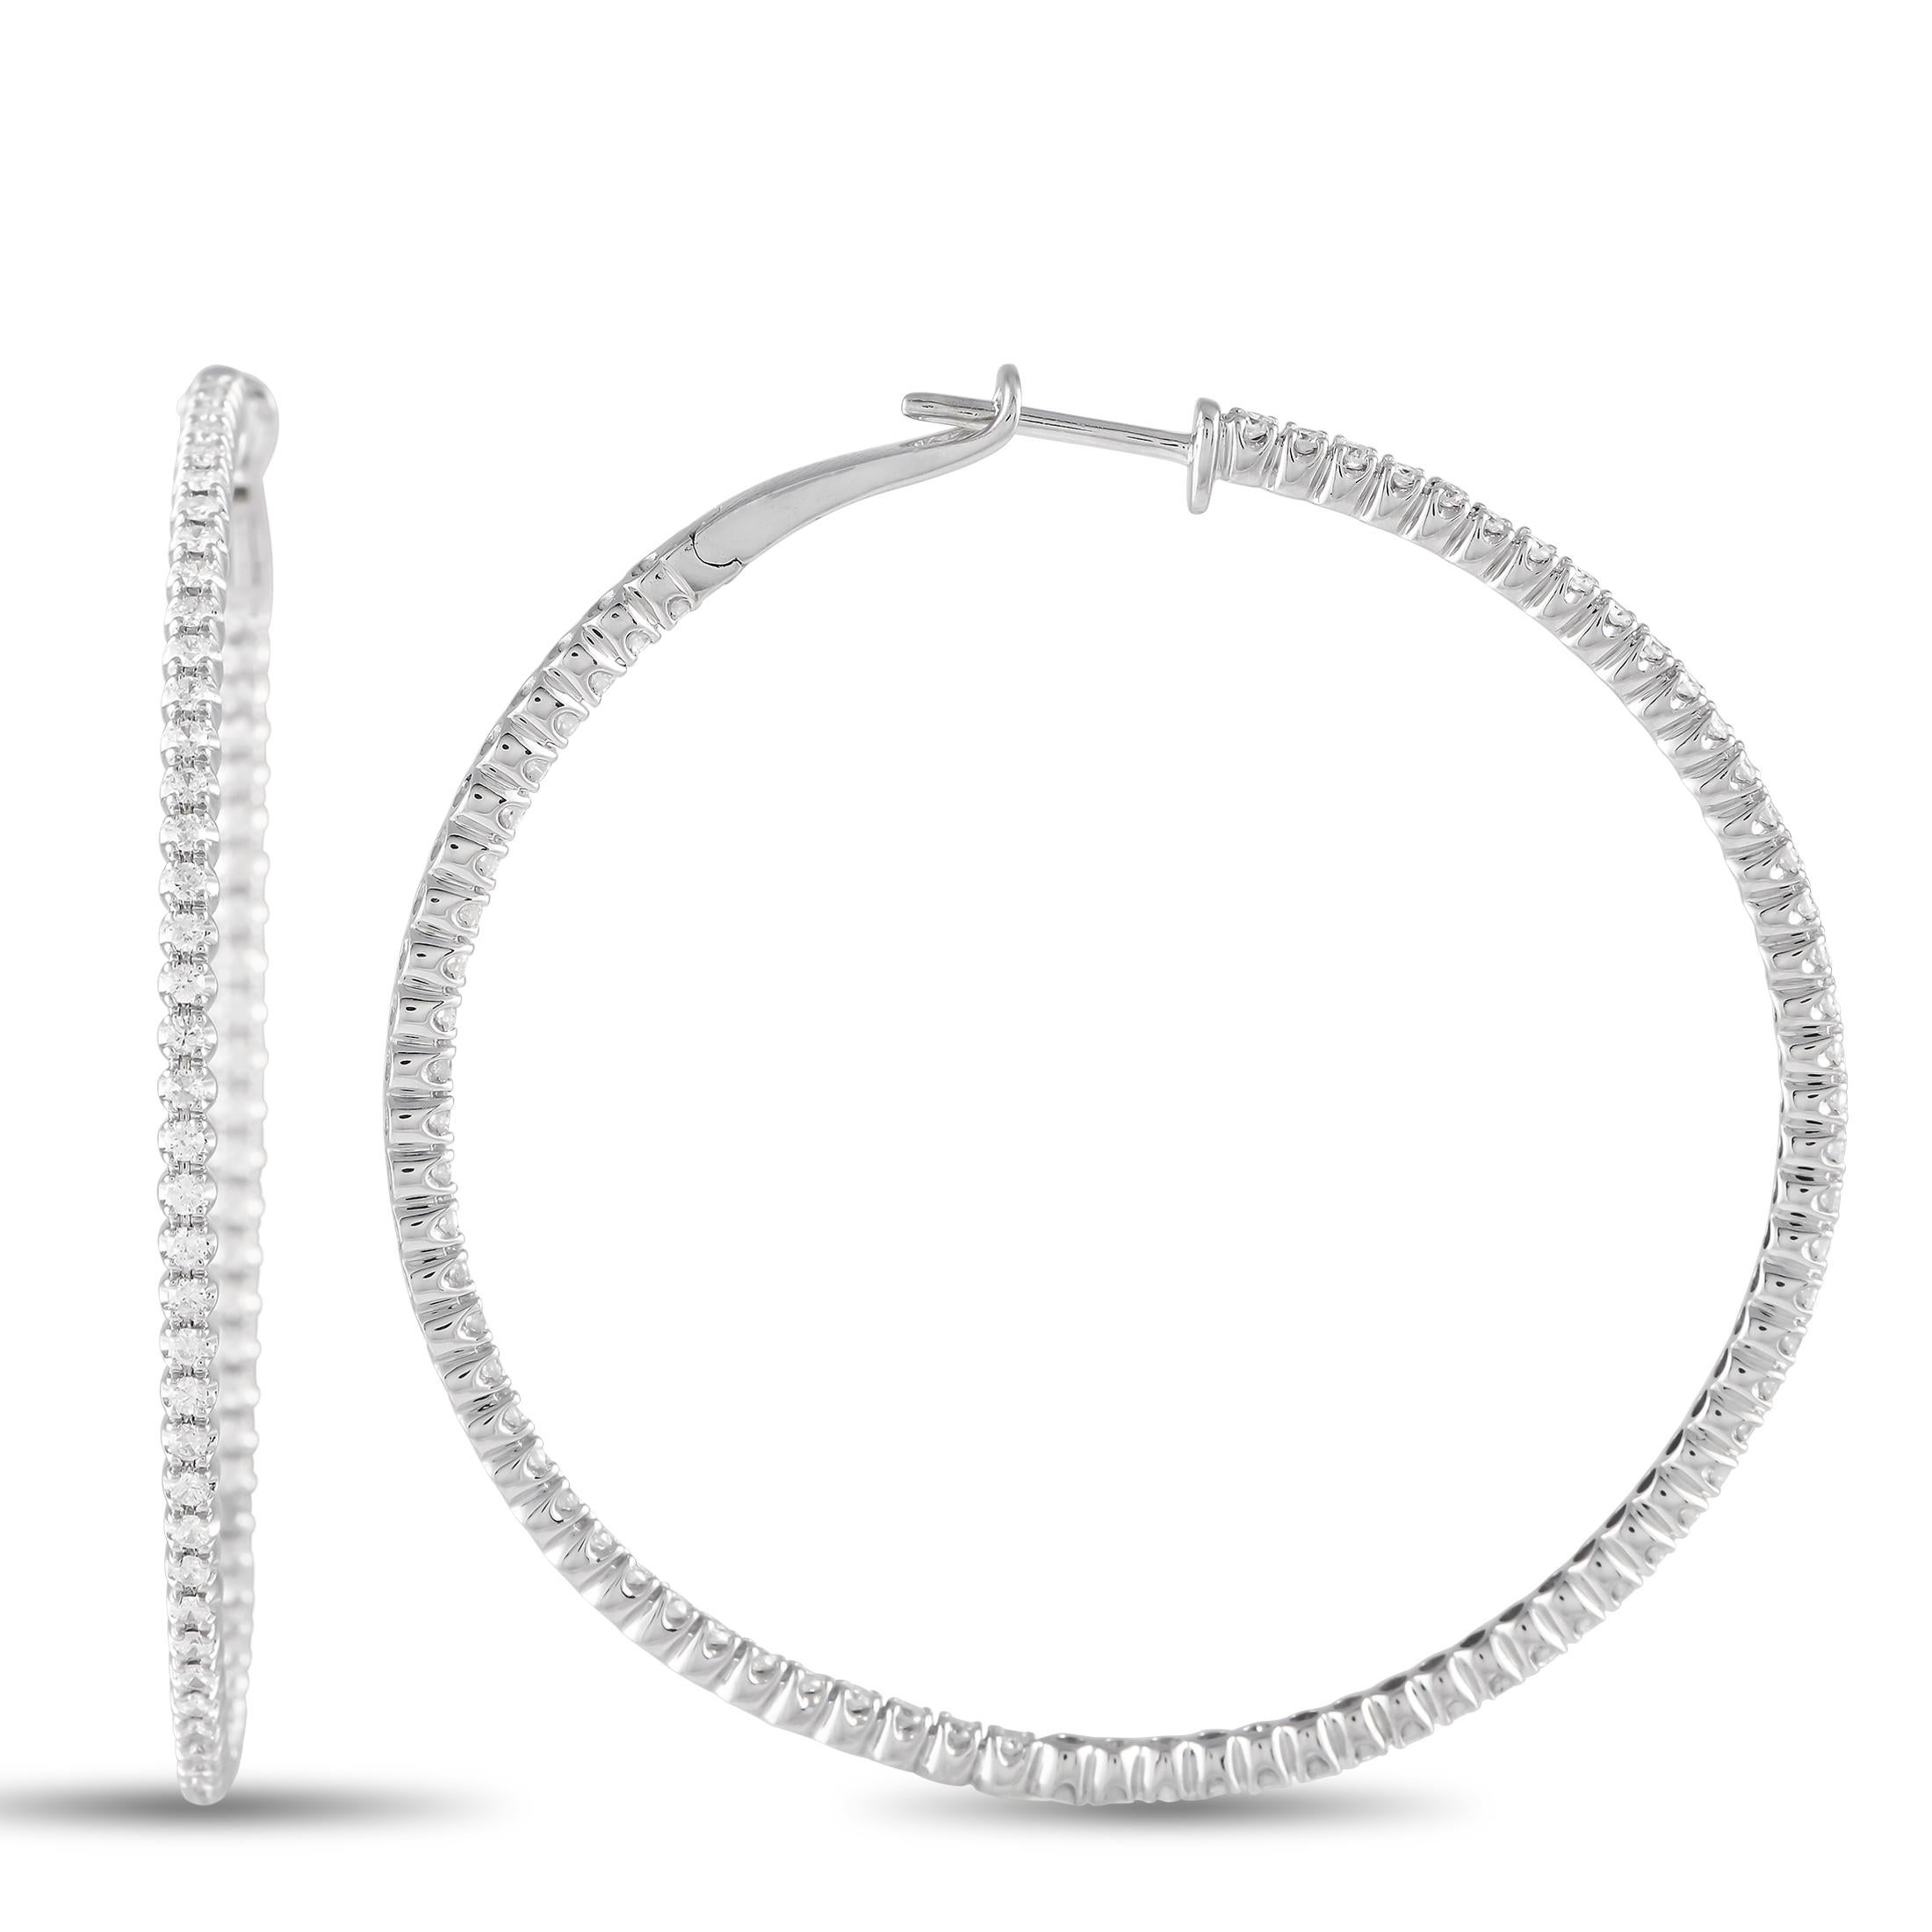 These elegant hoop earrings are ideal for anyone with a minimalist aesthetic. Each sleek, simple 14K White Gold setting measures 2.0\u201d round. Diamonds with a total weight of 1.70 carats make them incredibly luxurious.\r\nThis jewelry piece is